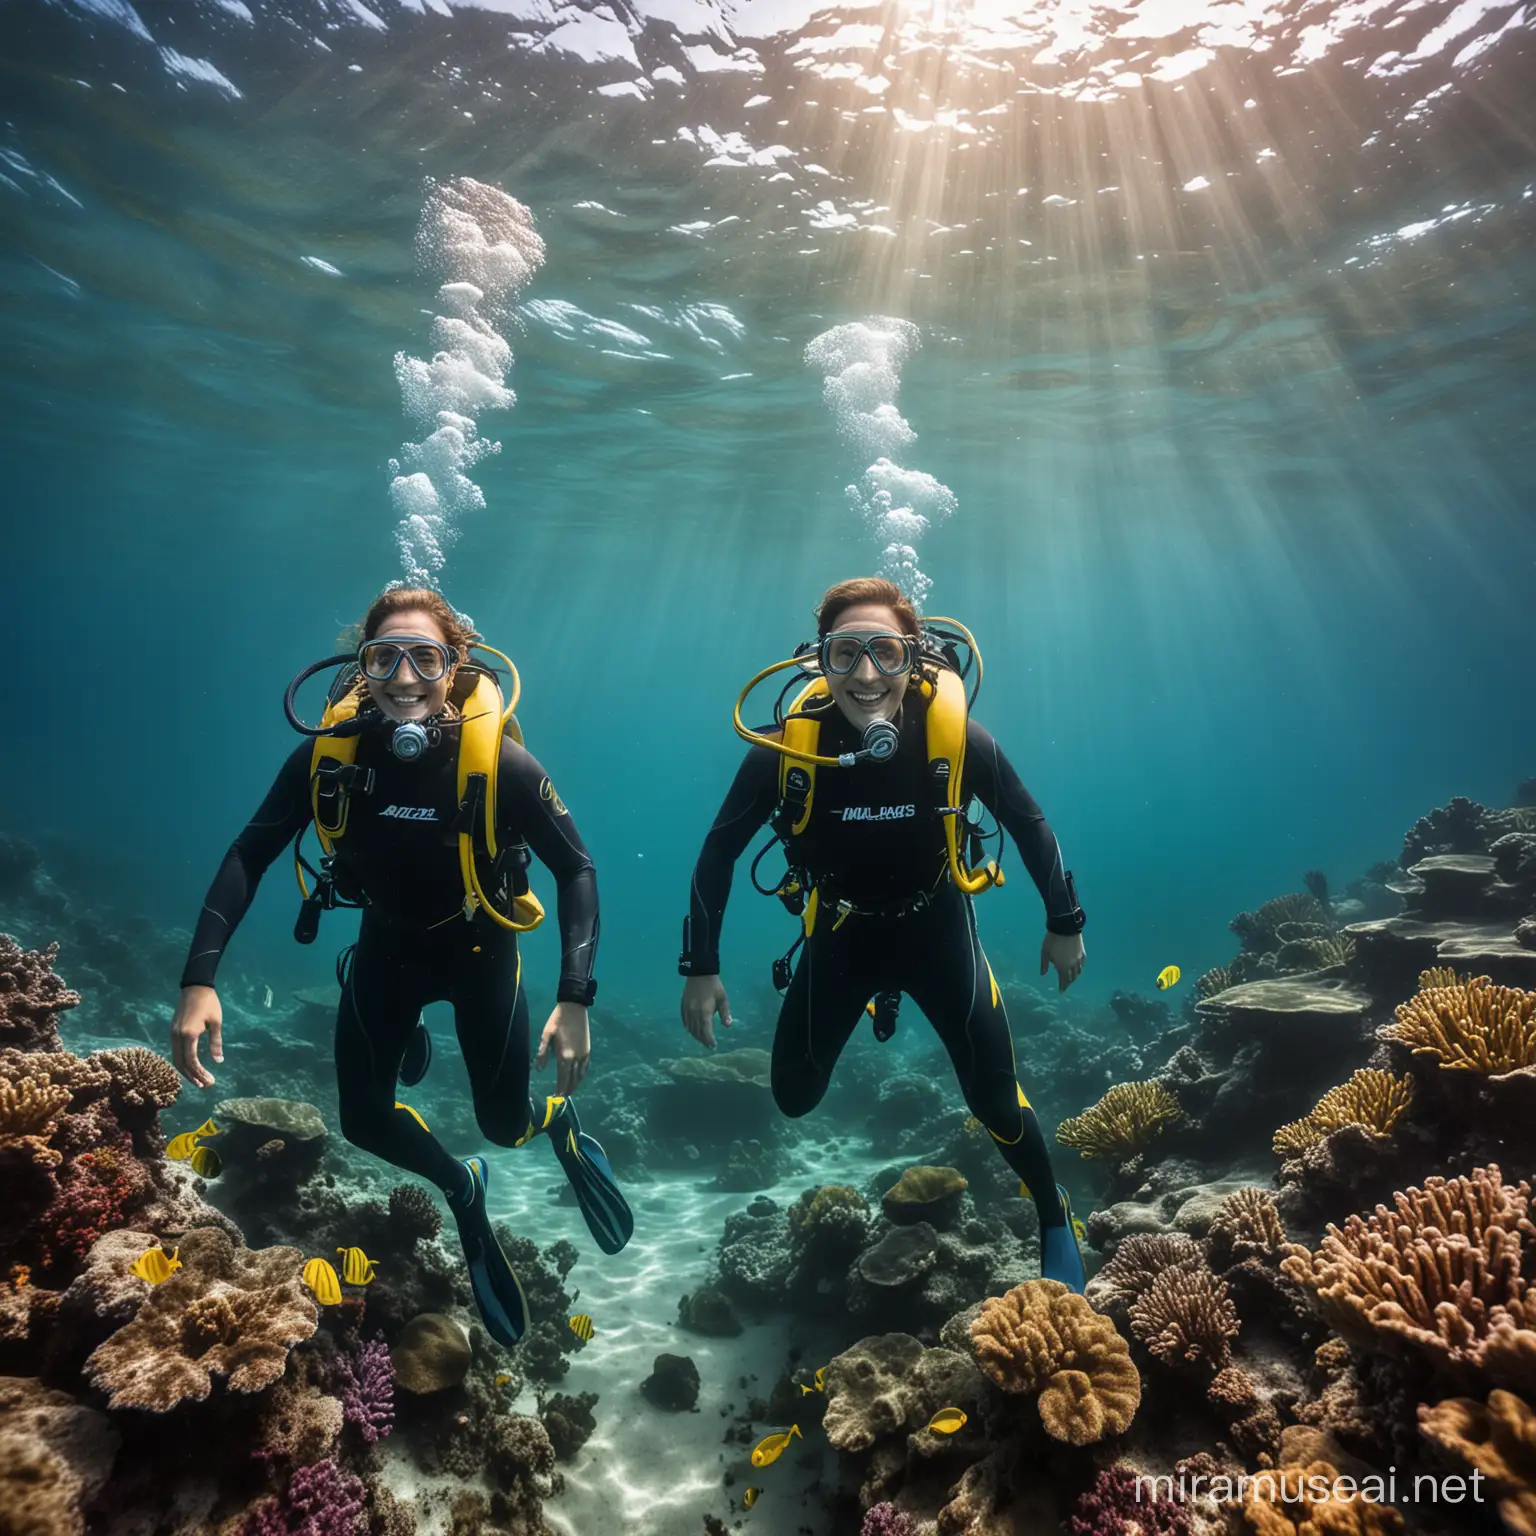 Create a vibrant underwater scene featuring two enthusiastic scuba divers wearing colorful wetsuits and aqualungs. The divers should be depicted with big smiles on their faces as they pose for the camera, surrounded by the mesmerizing beauty of the ocean depths. Capture the essence of adventure and camaraderie in this underwater exploration moment